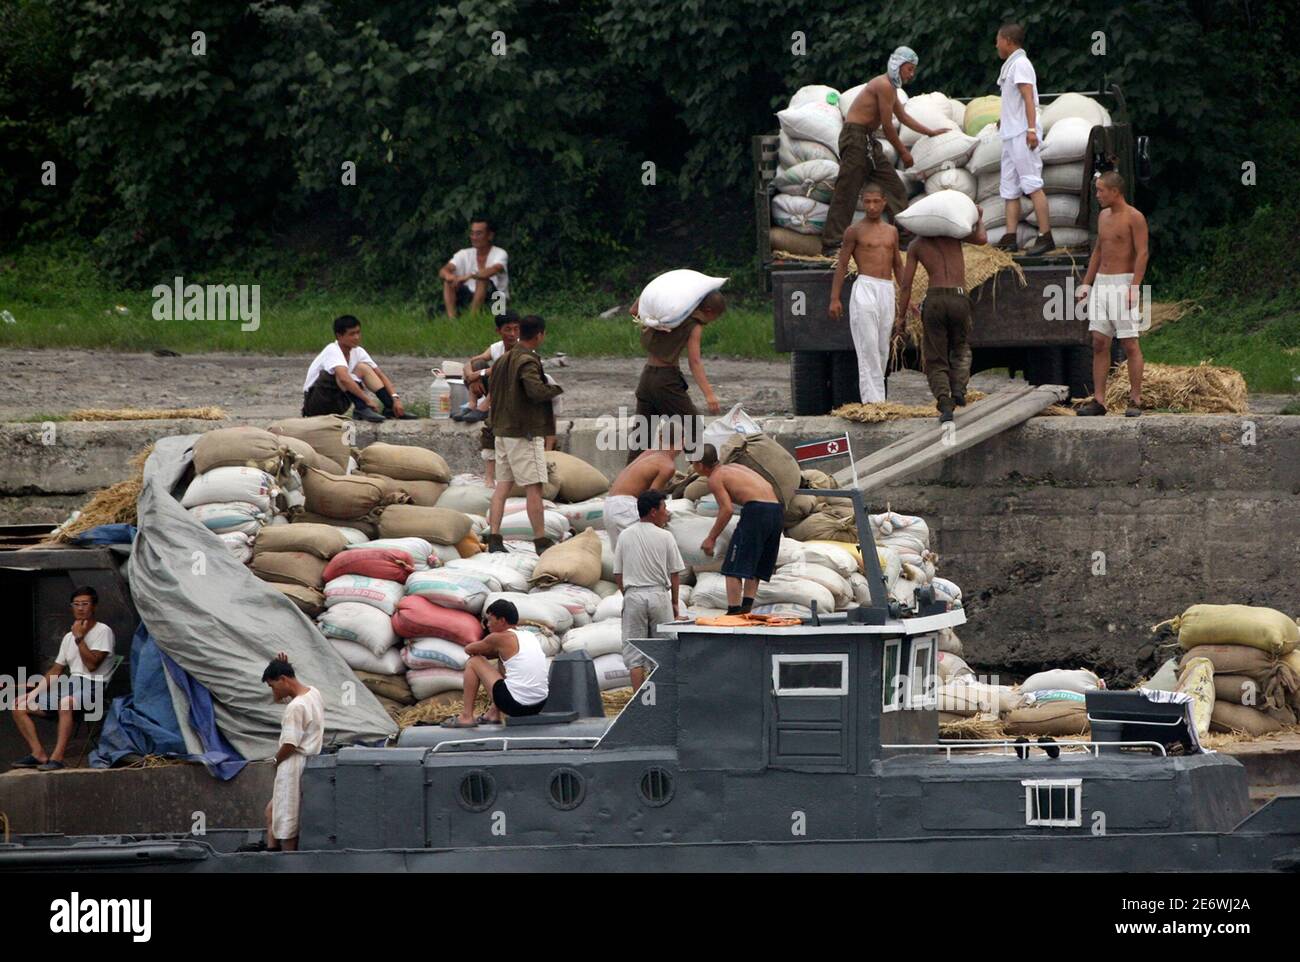 North Korean soldiers unload bags of corn from a cargo boat on the bank of the Yalu River near the North Korean town of Sinuiju August 4, 2009. Former U.S. President Bill Clinton arrived in North Korea on Tuesday to try to win the release of two jailed U.S. journalists, a move some analysts said could mark the isolated state's return to dialogue over nuclear weapons. REUTERS/Jacky Chen (NORTH KOREA MILITARY SOCIETY POLITICS IMAGES OF THE DAY) Stock Photo